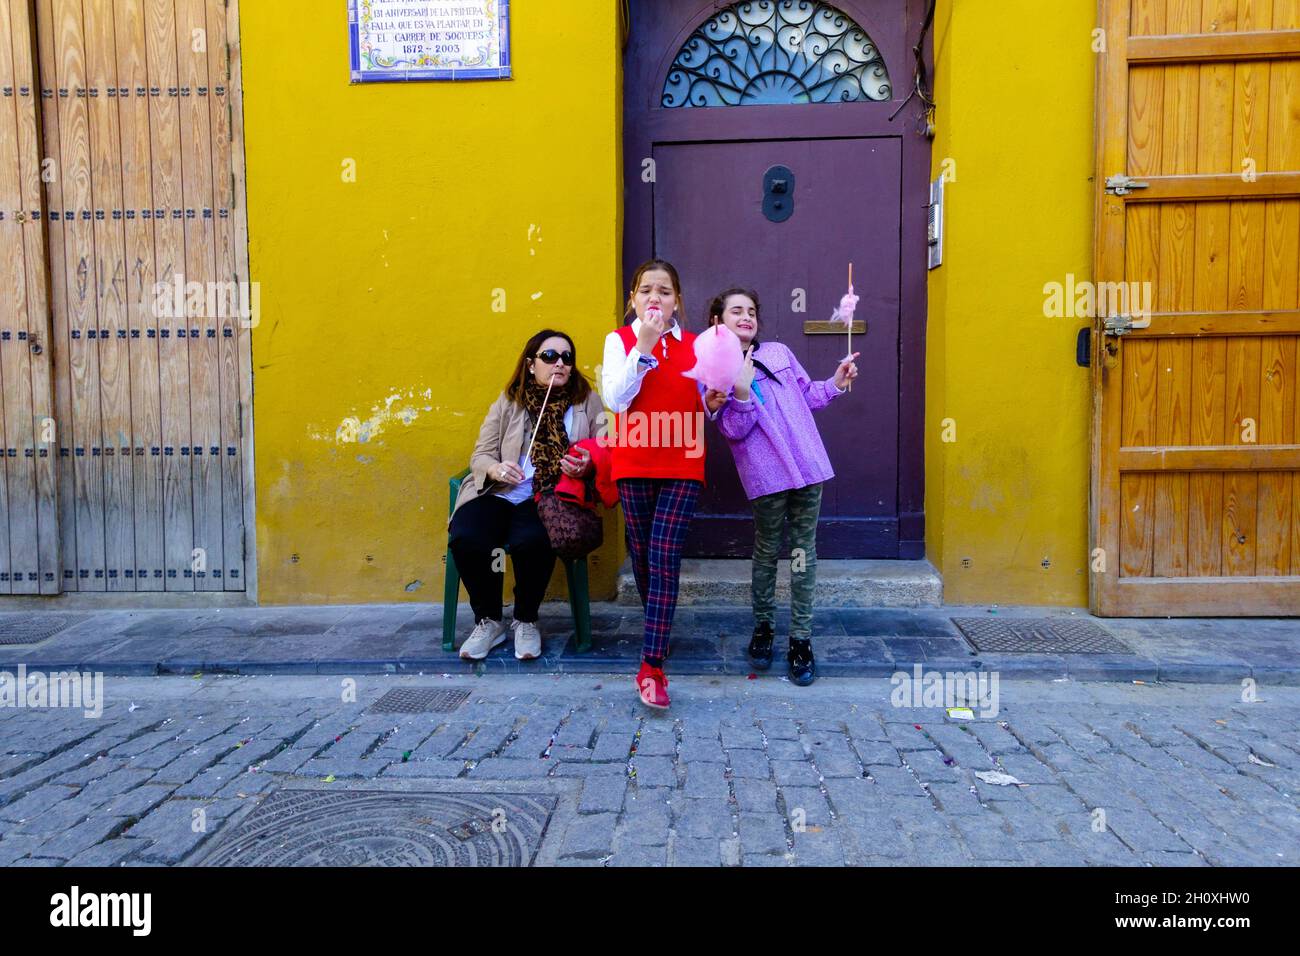 Two girls with cotton candy in El Carmen Valencia Spain streets Stock Photo